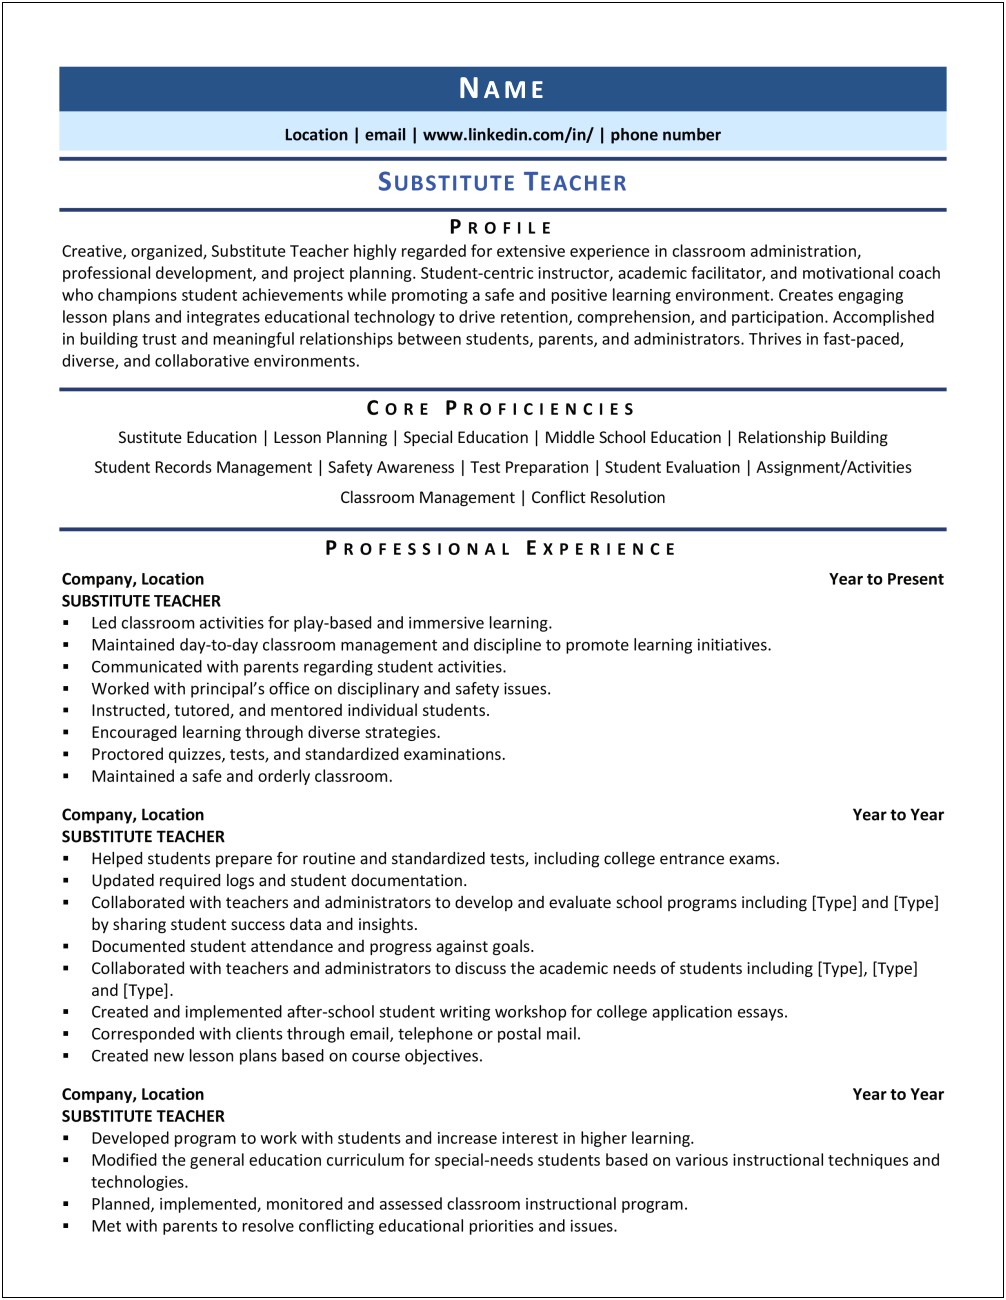 Resume Objective Statement Special Education Teacher